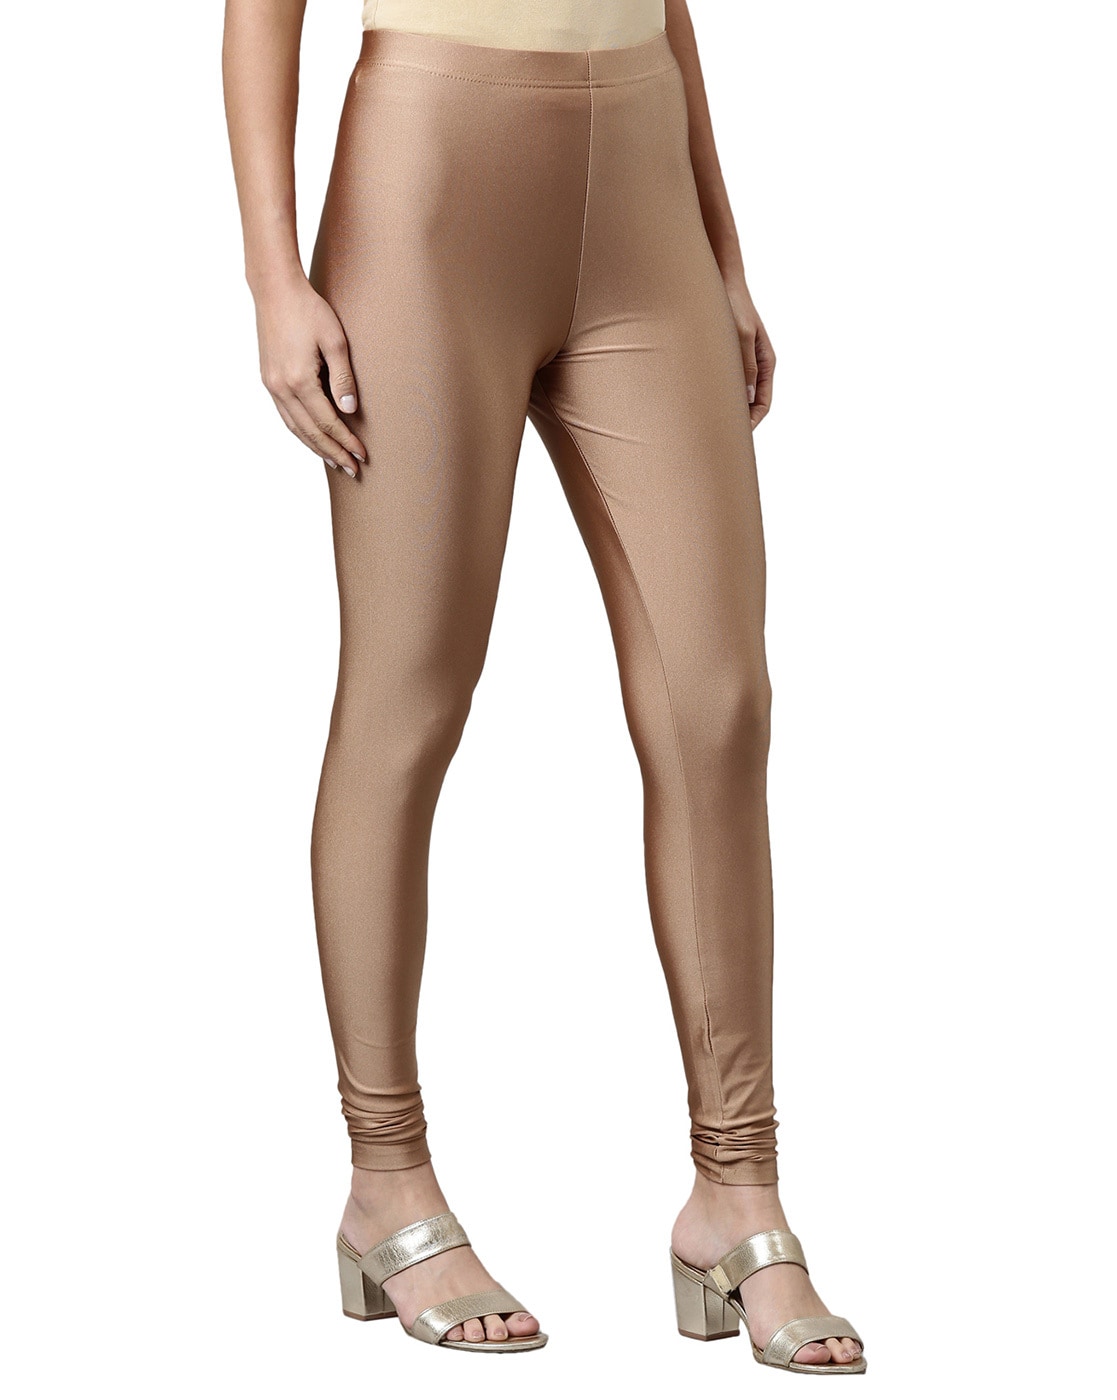 PAK OF 1 GOLD ,Silver Tights for Women